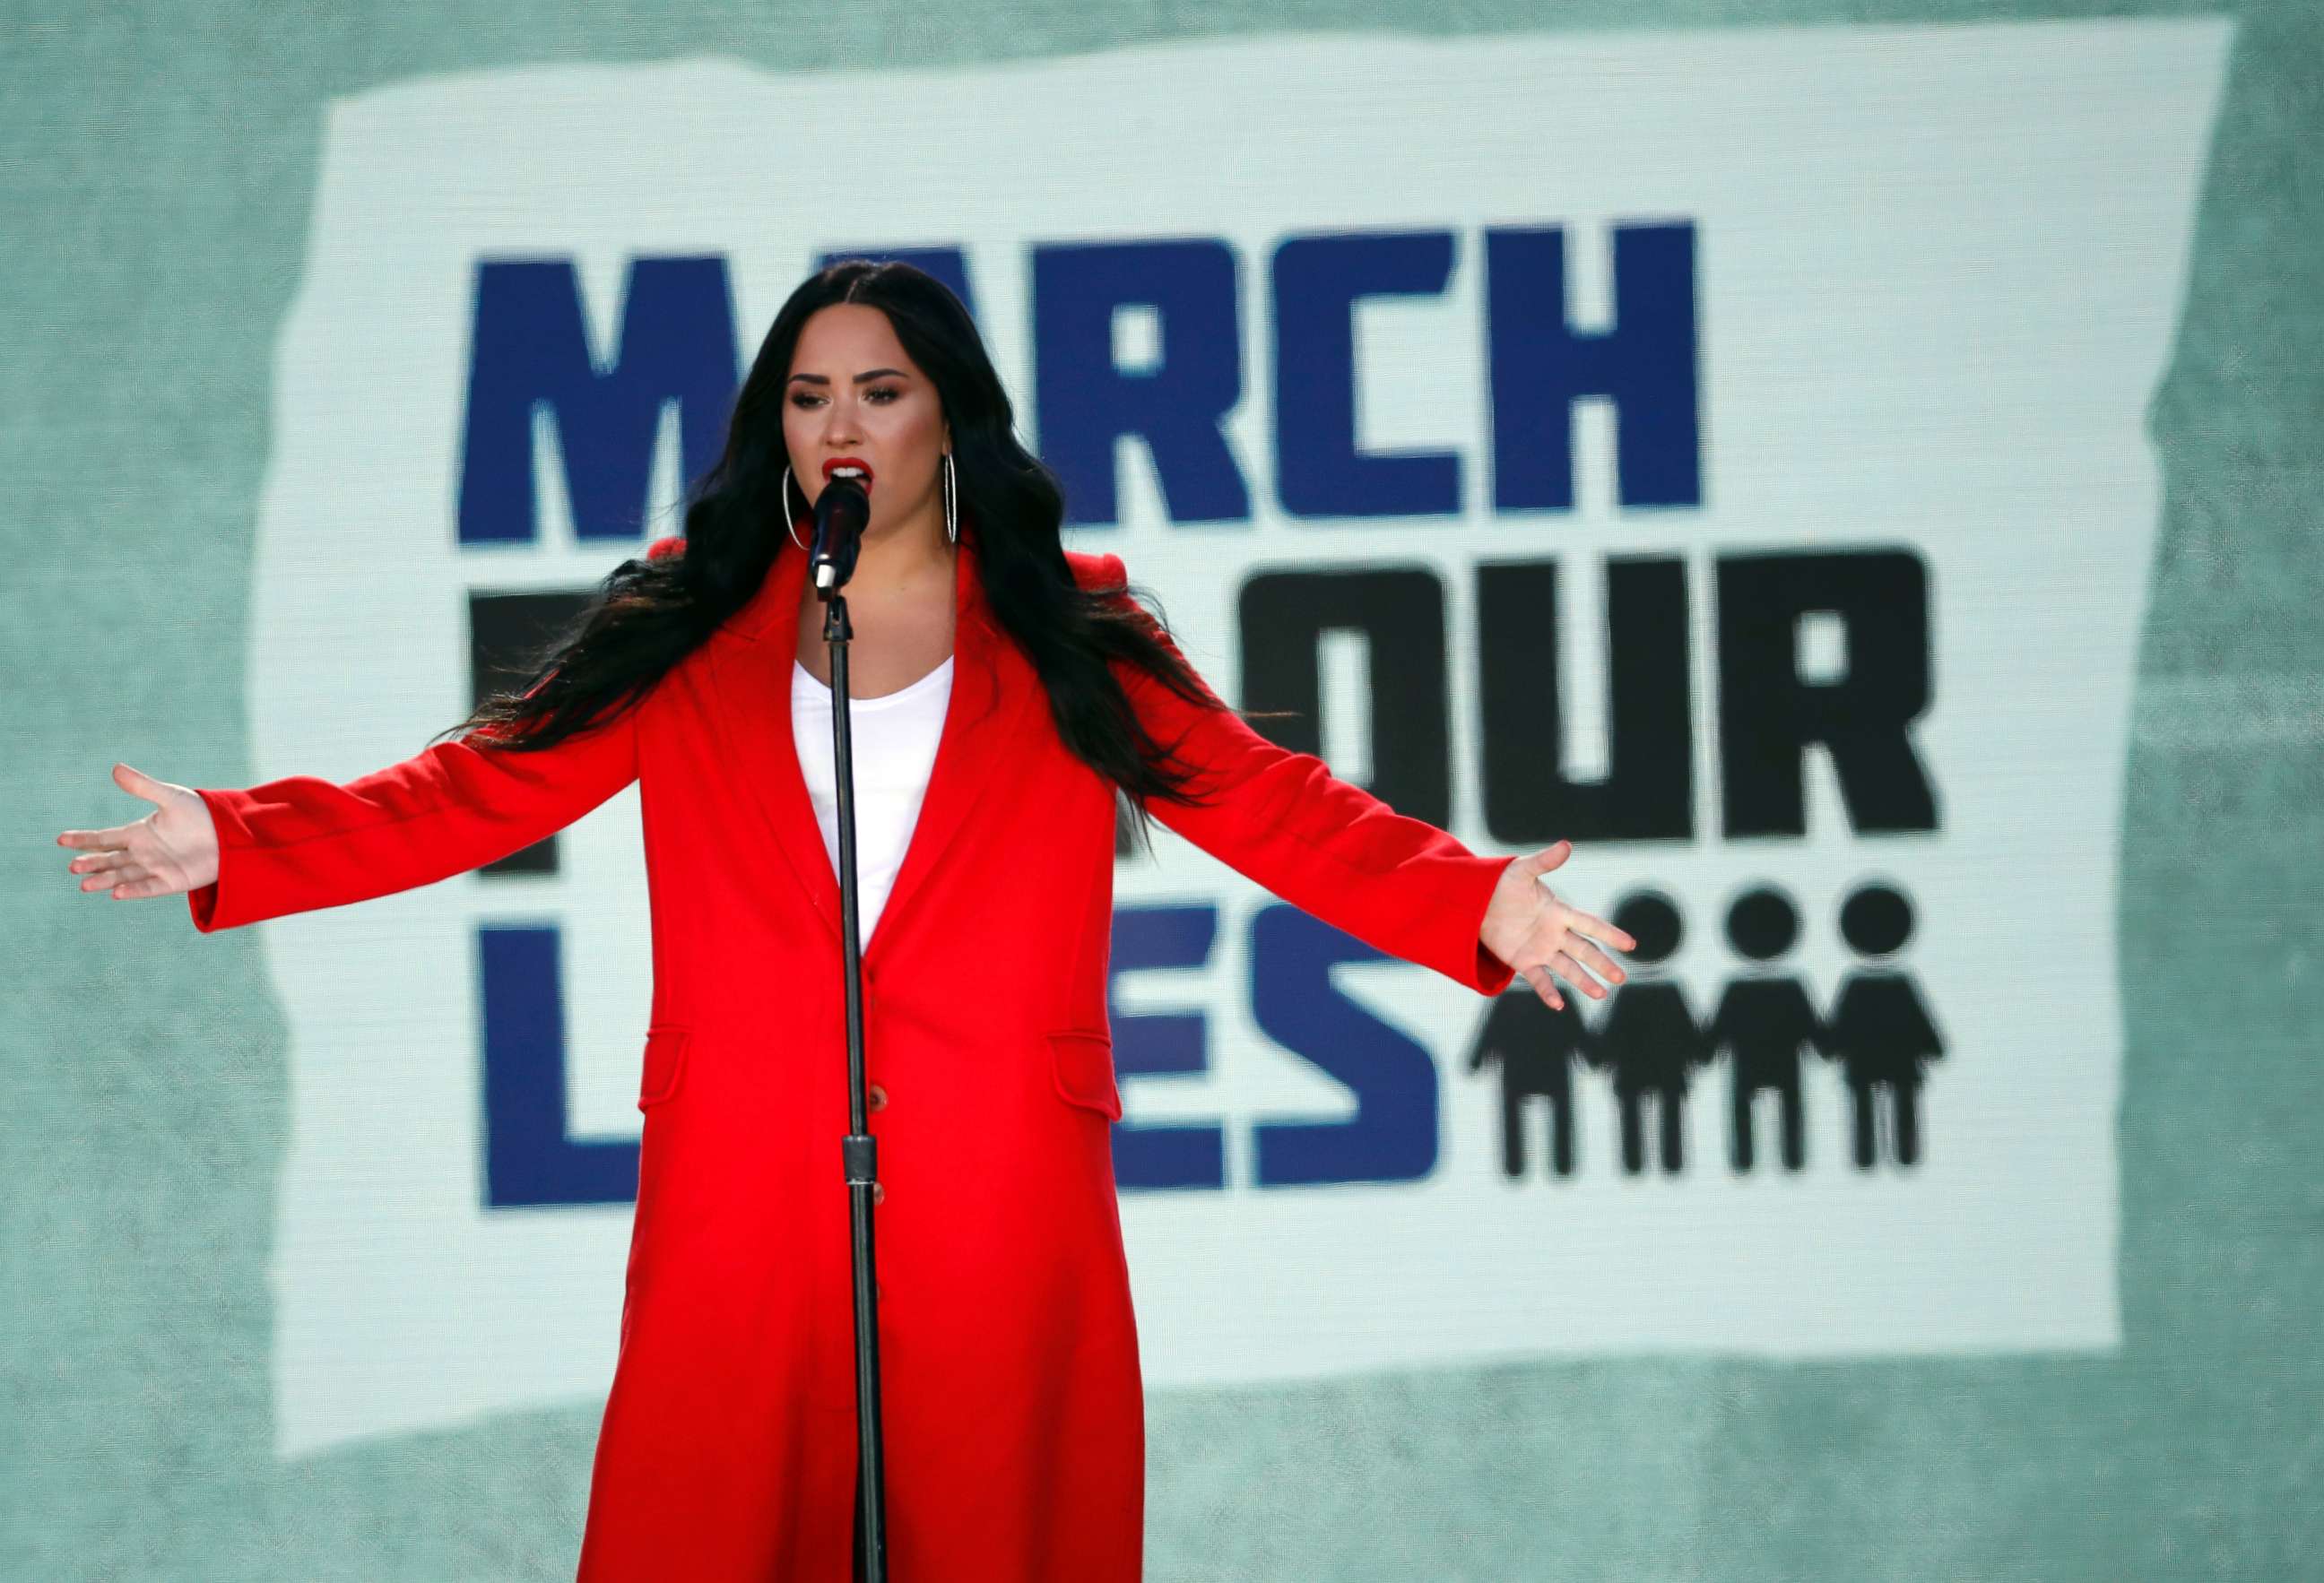 PHOTO: Demi Lovato performs "Skyscraper" during the March for Our Lives rally in support of gun control, March 24, 2018, in Washington D.C.